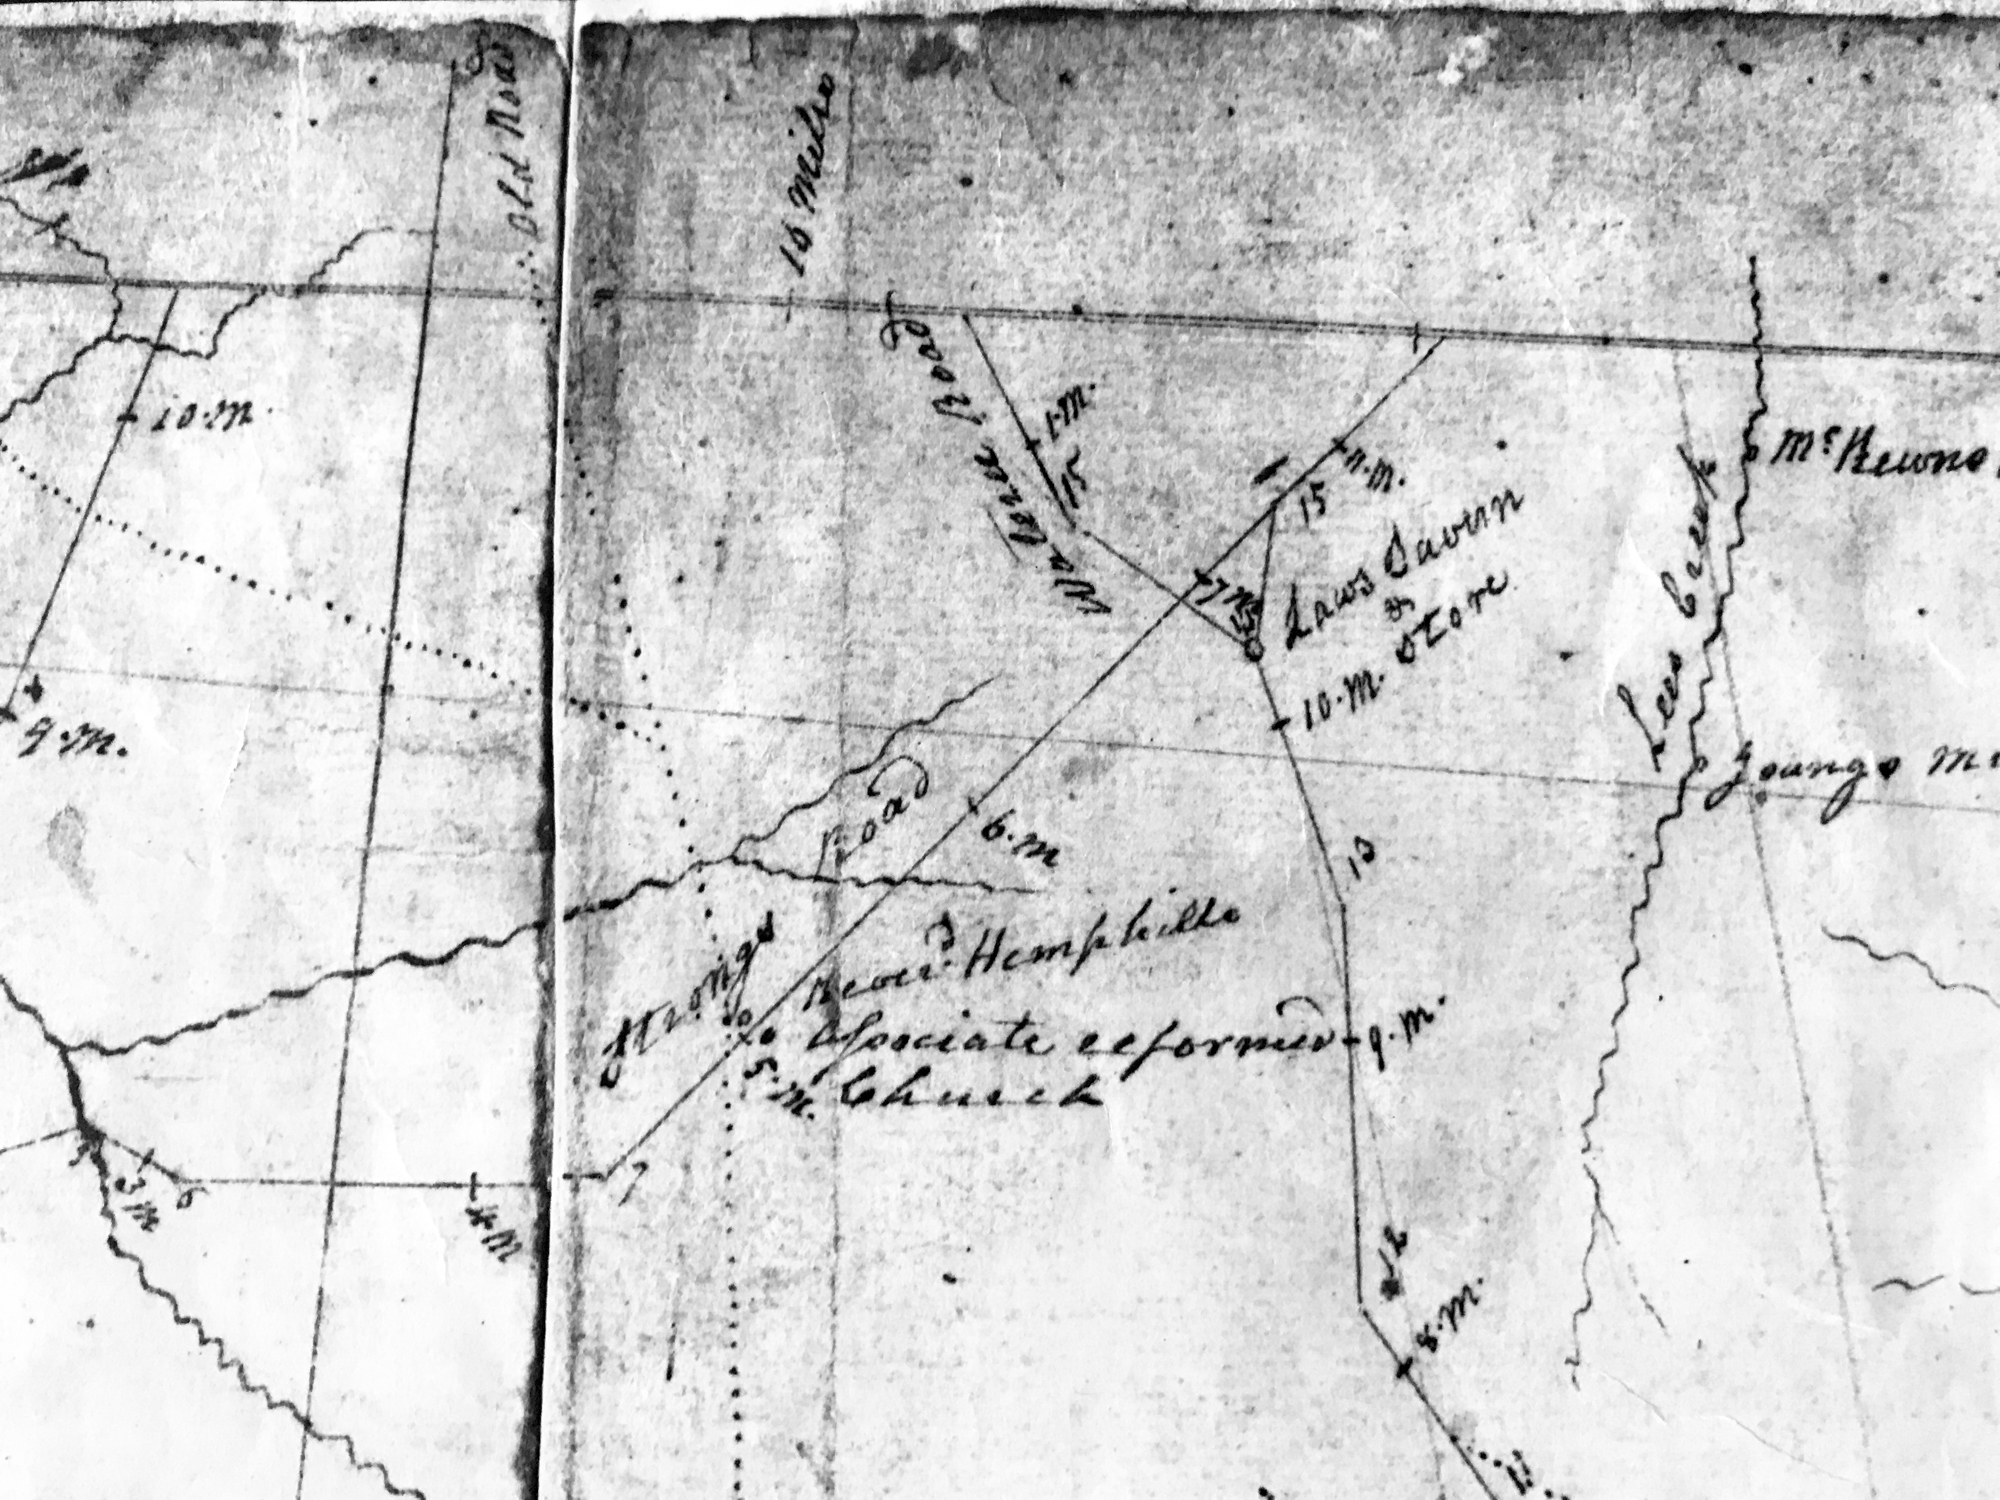 CHARLES BOYD'S 1818 MAP OF CHESTER CO, S.C. - ARP CHURCH AND MORE